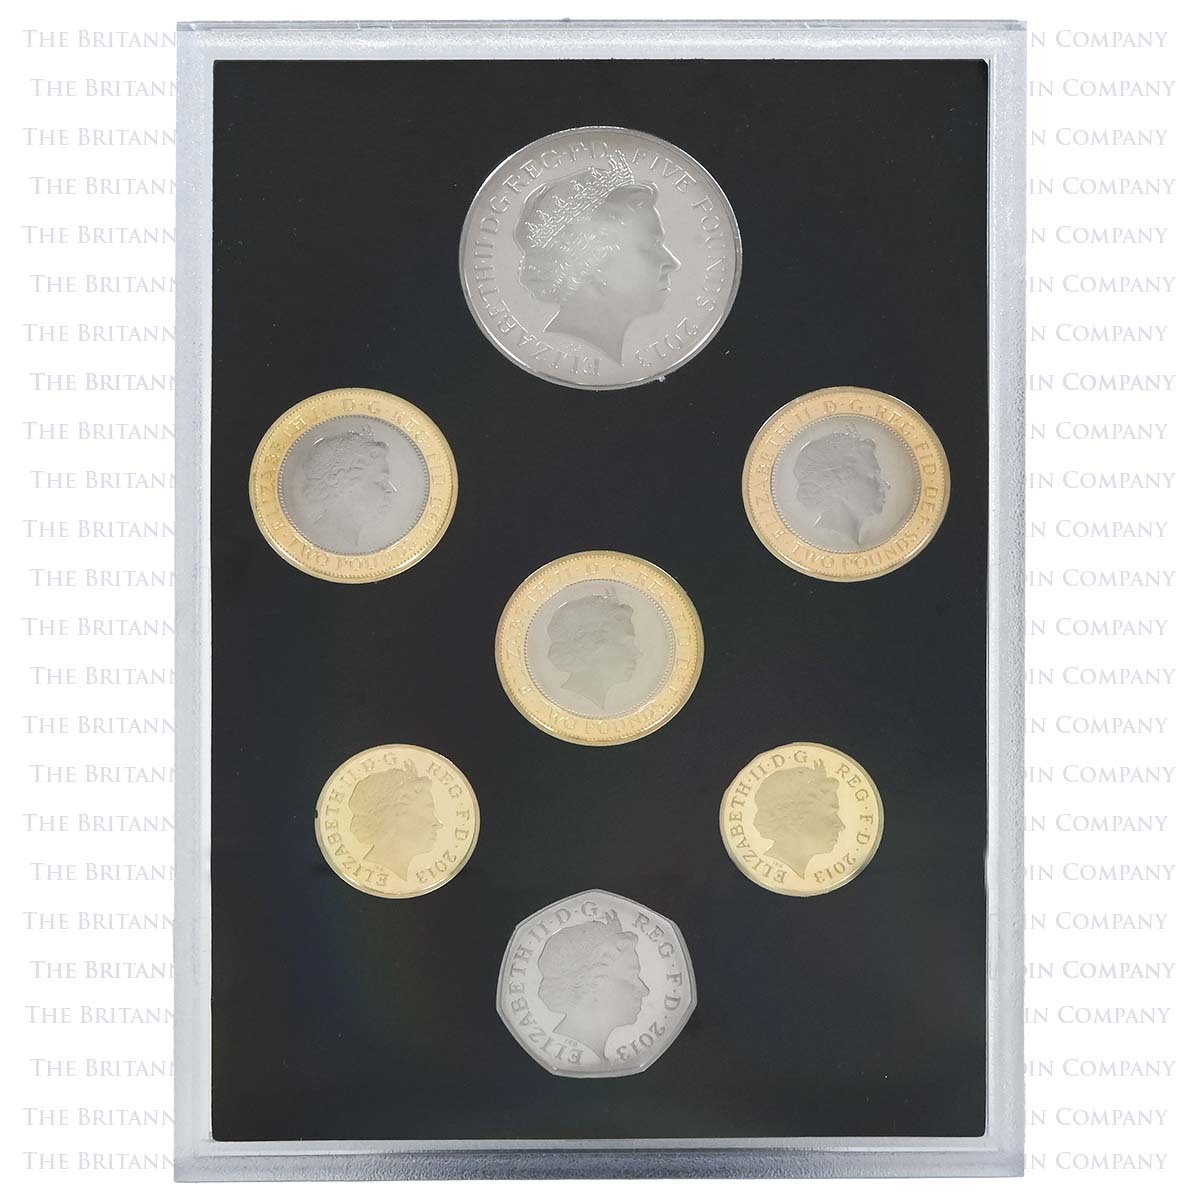 2013-proof-coin-set-collector-edtition-005-m